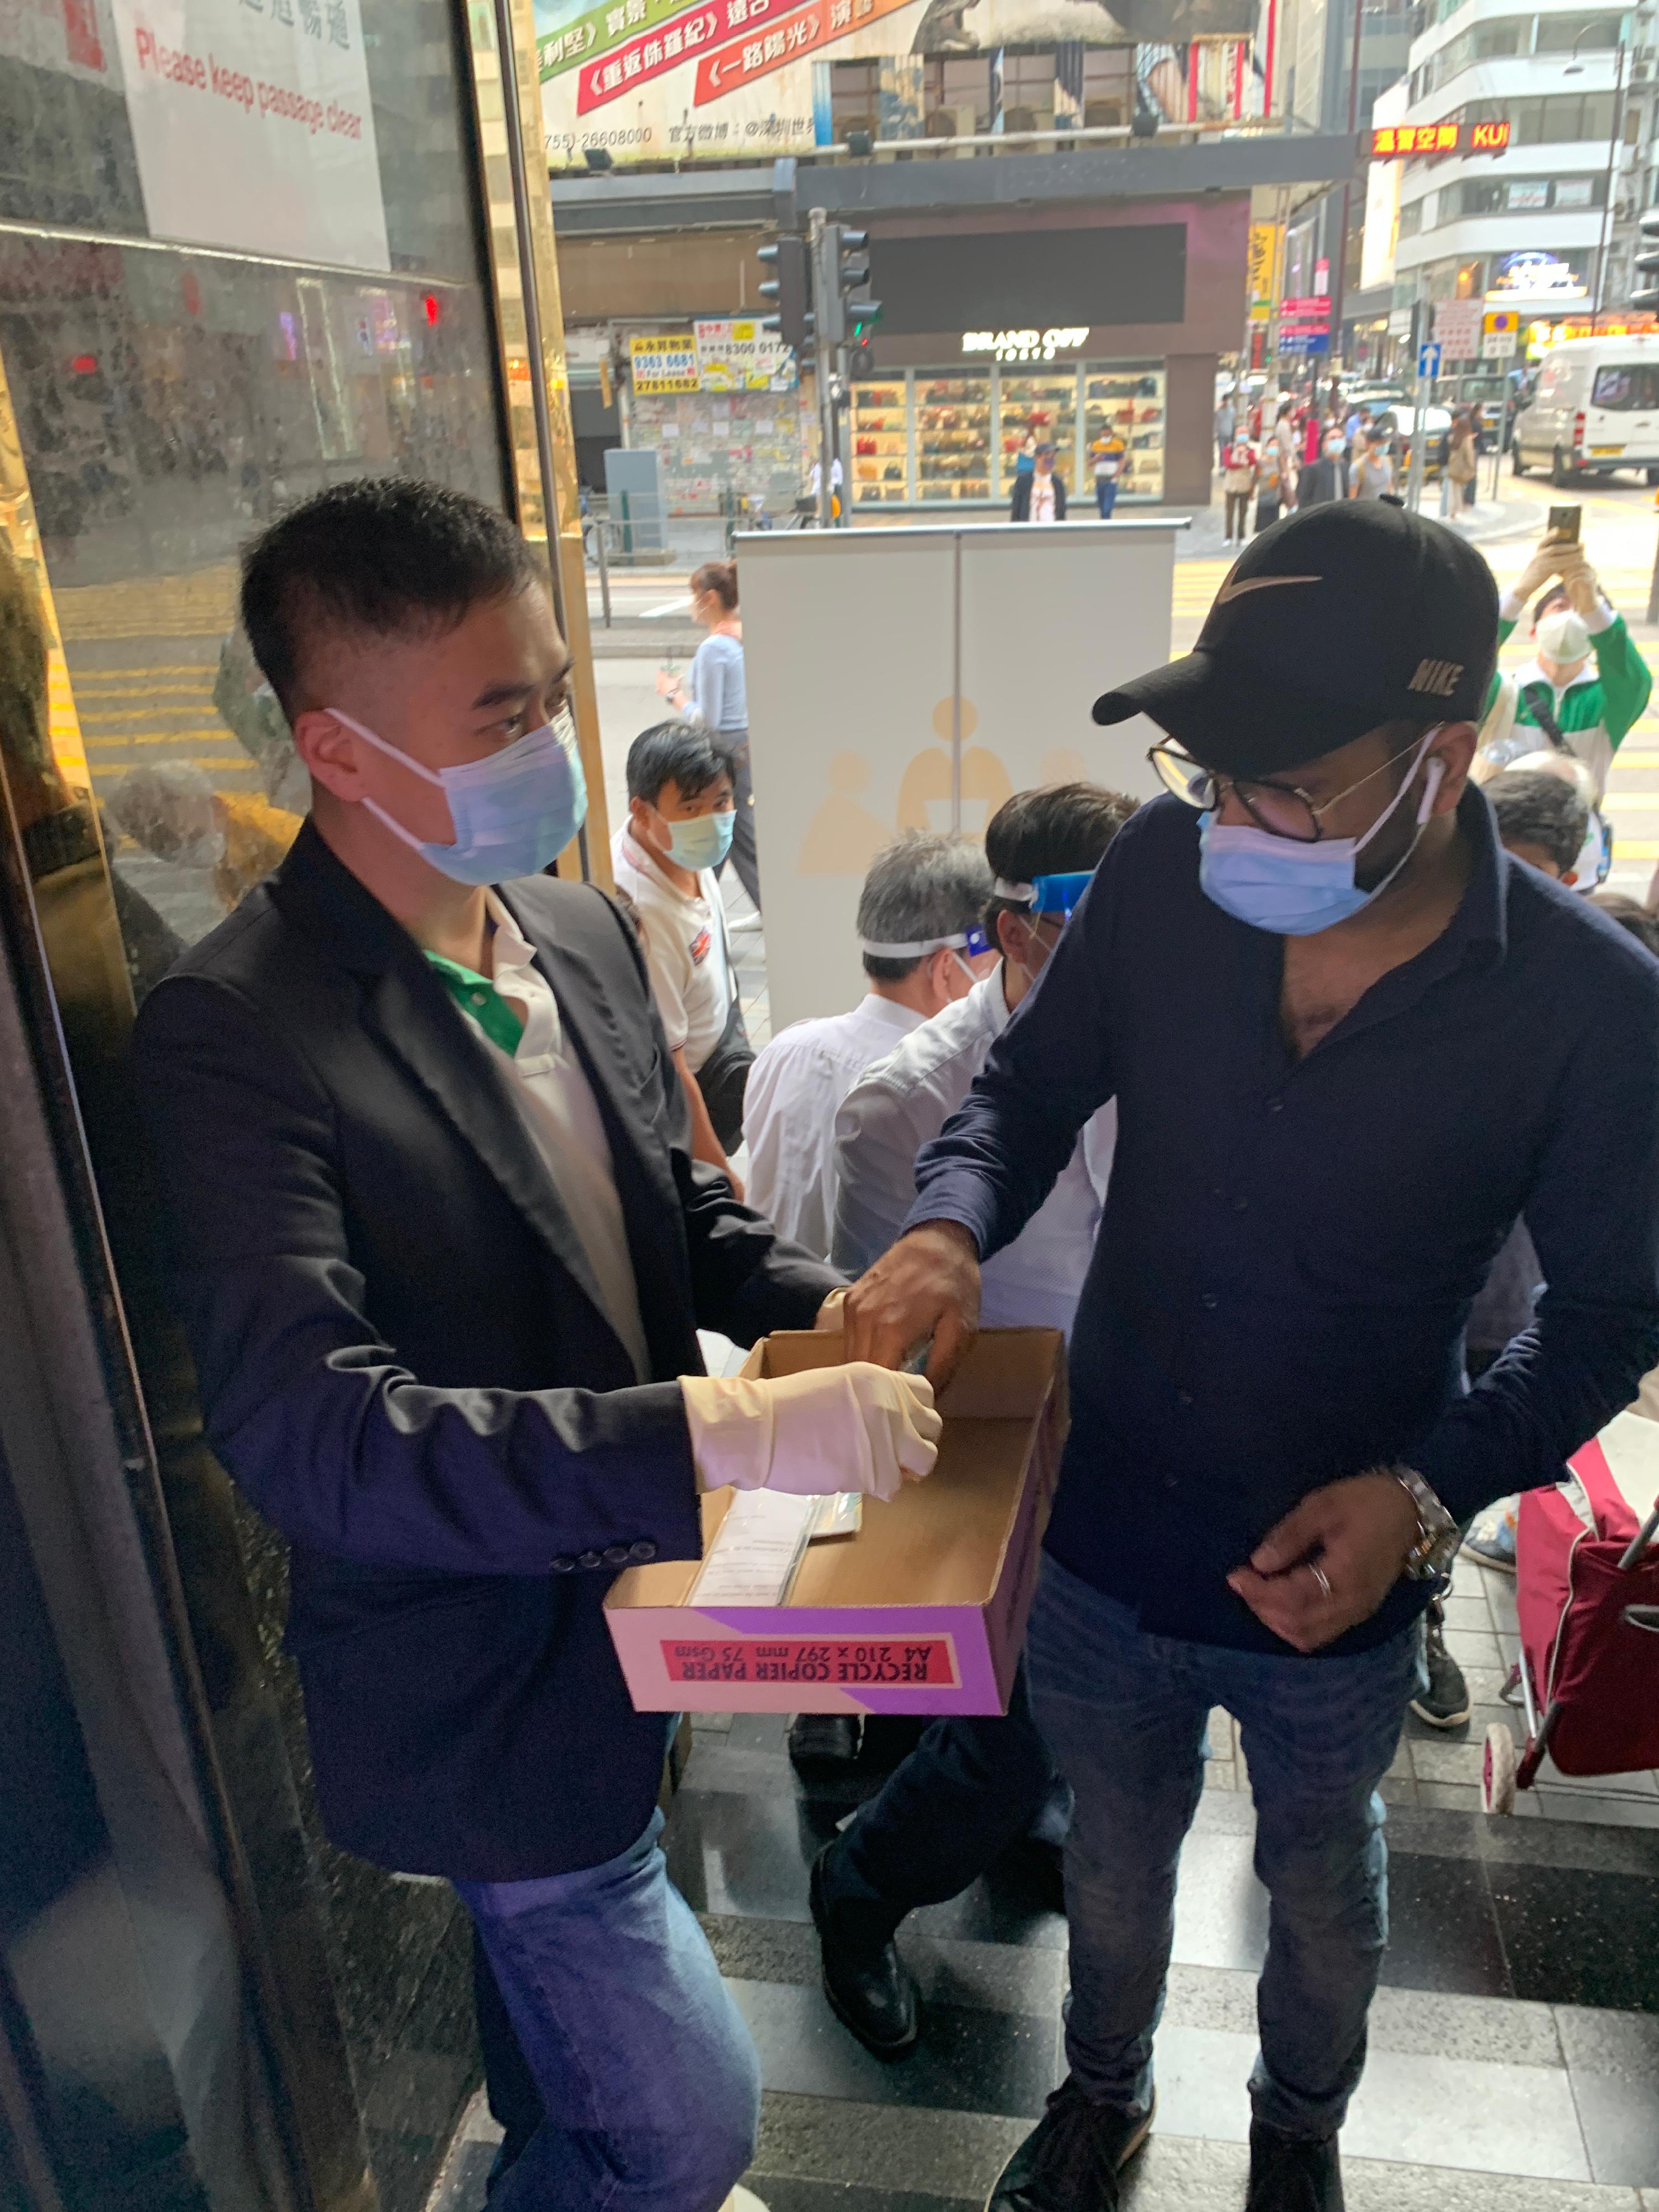 Over the past few days, the Yau Tsim Mong District Office has been distributing rapid test kits to residents of buildings in Yau Tsim Mong District where more ethnic minorities reside. Photo shows the District Officer (Yau Tsim Mong), Mr Edward Yu (left), distributing rapid test kits to residents of Chungking Mansions on March 5.